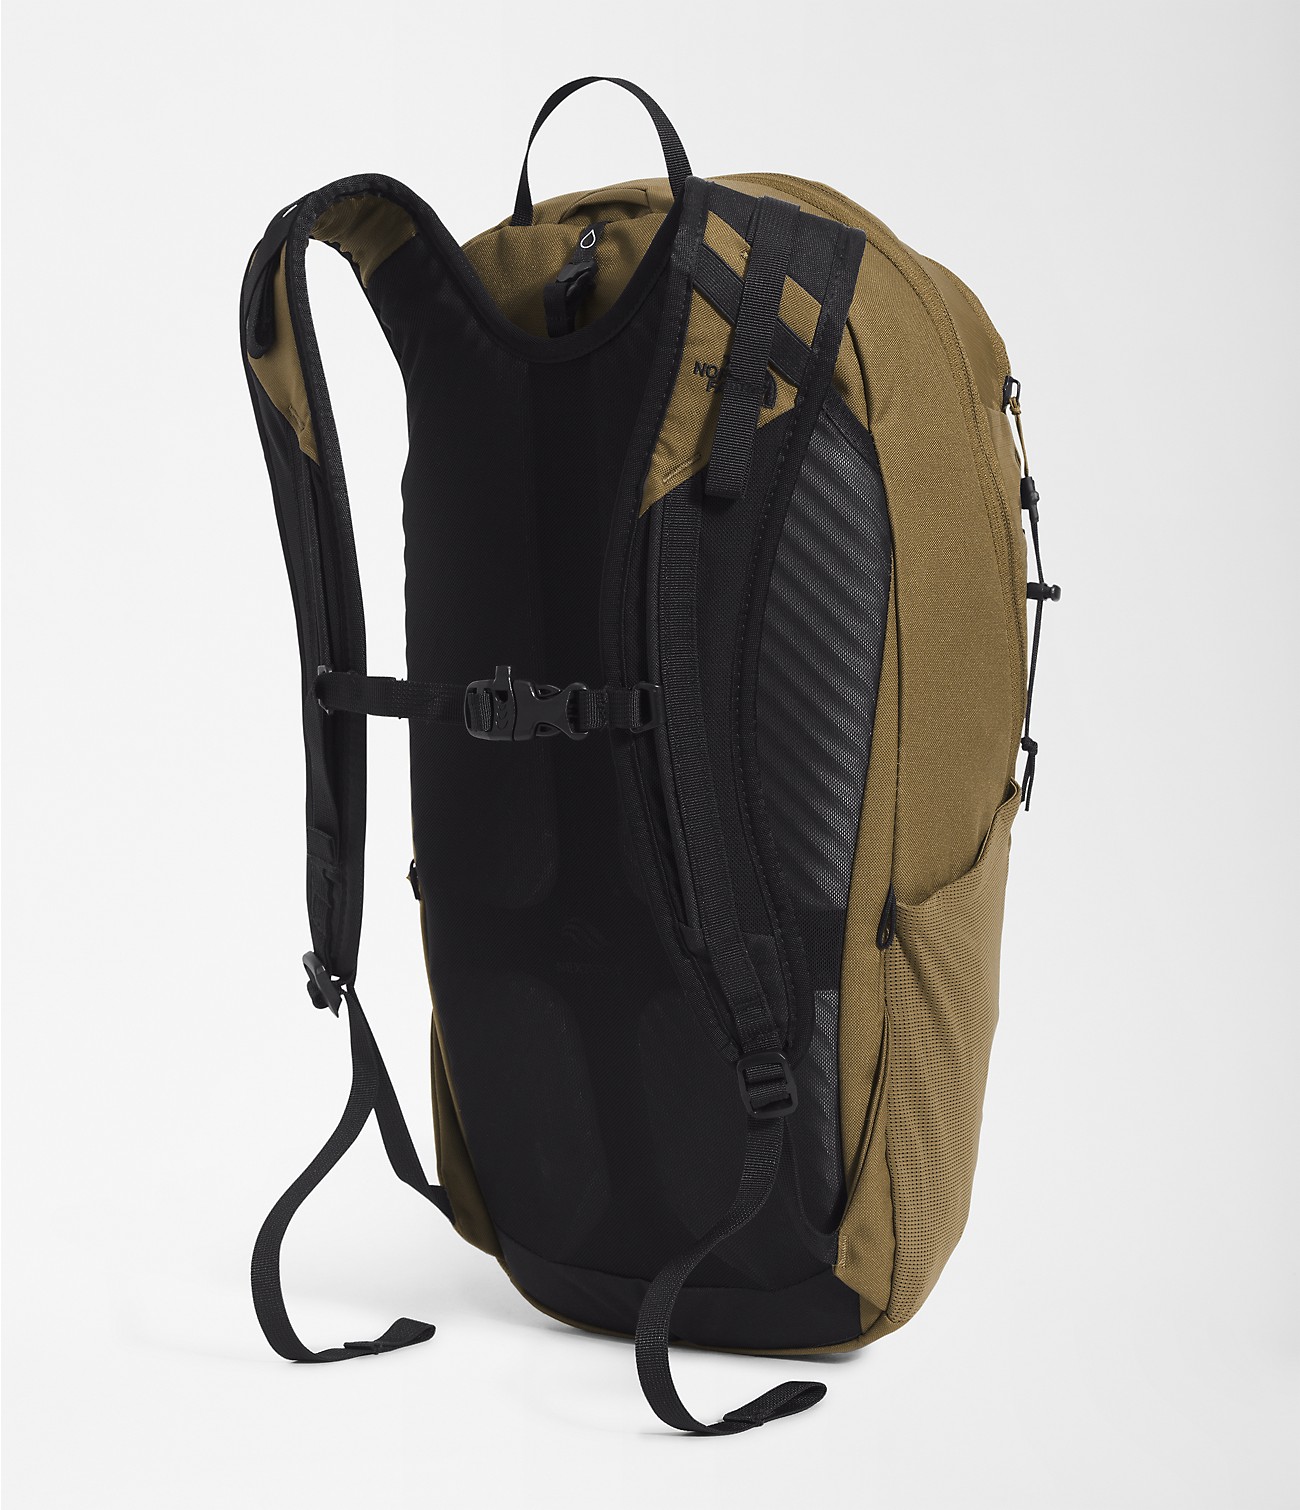 Basin 18 Backpack | The North Face